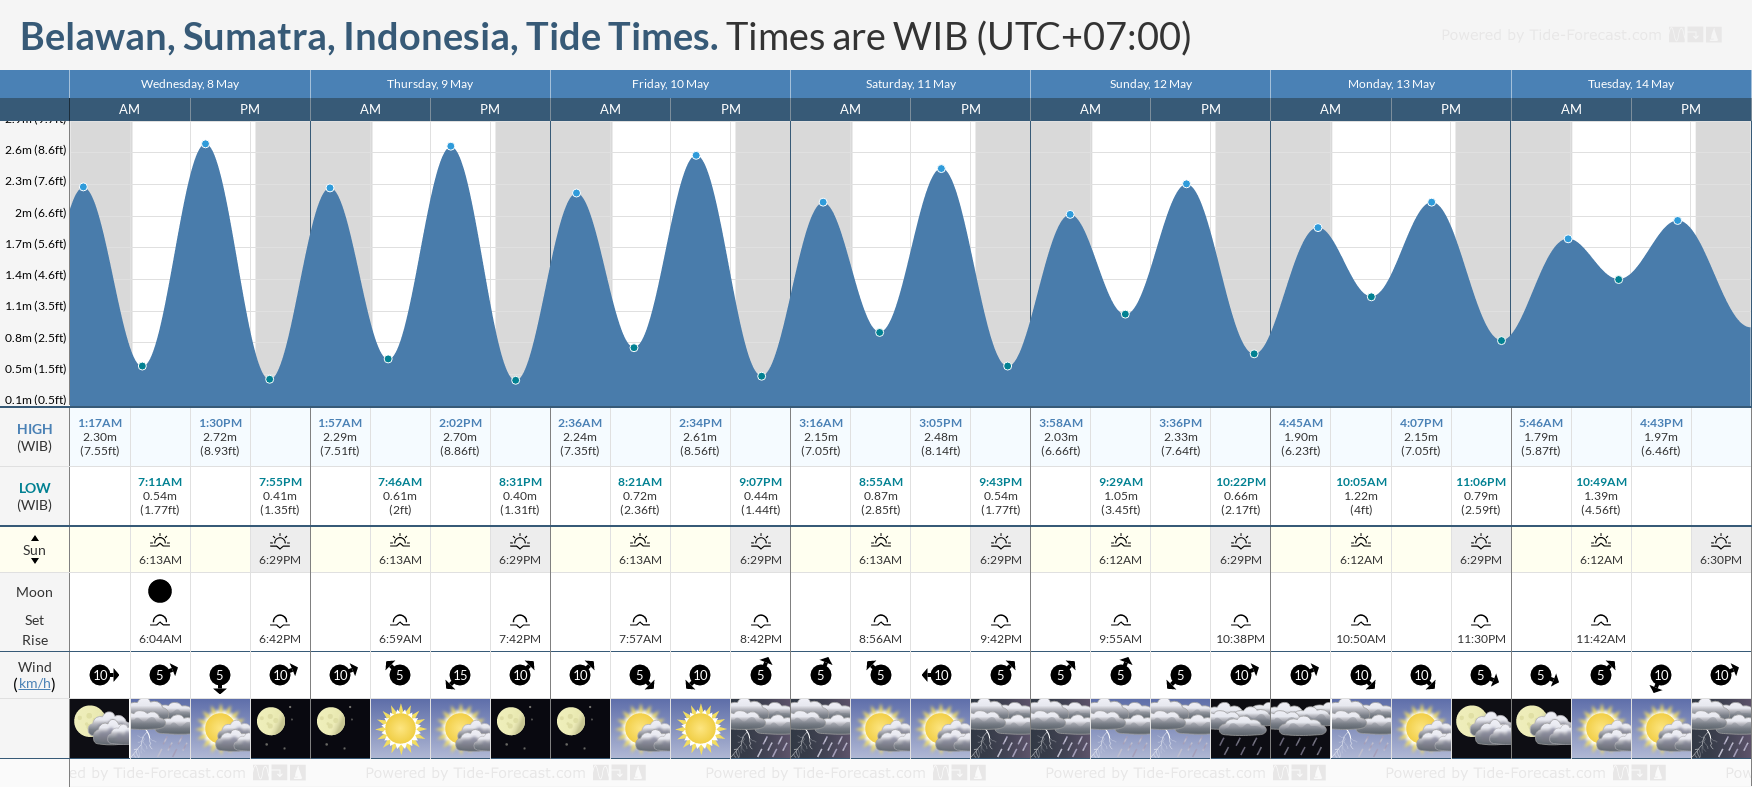 Belawan, Sumatra, Indonesia Tide Chart including high and low tide tide times for the next 7 days